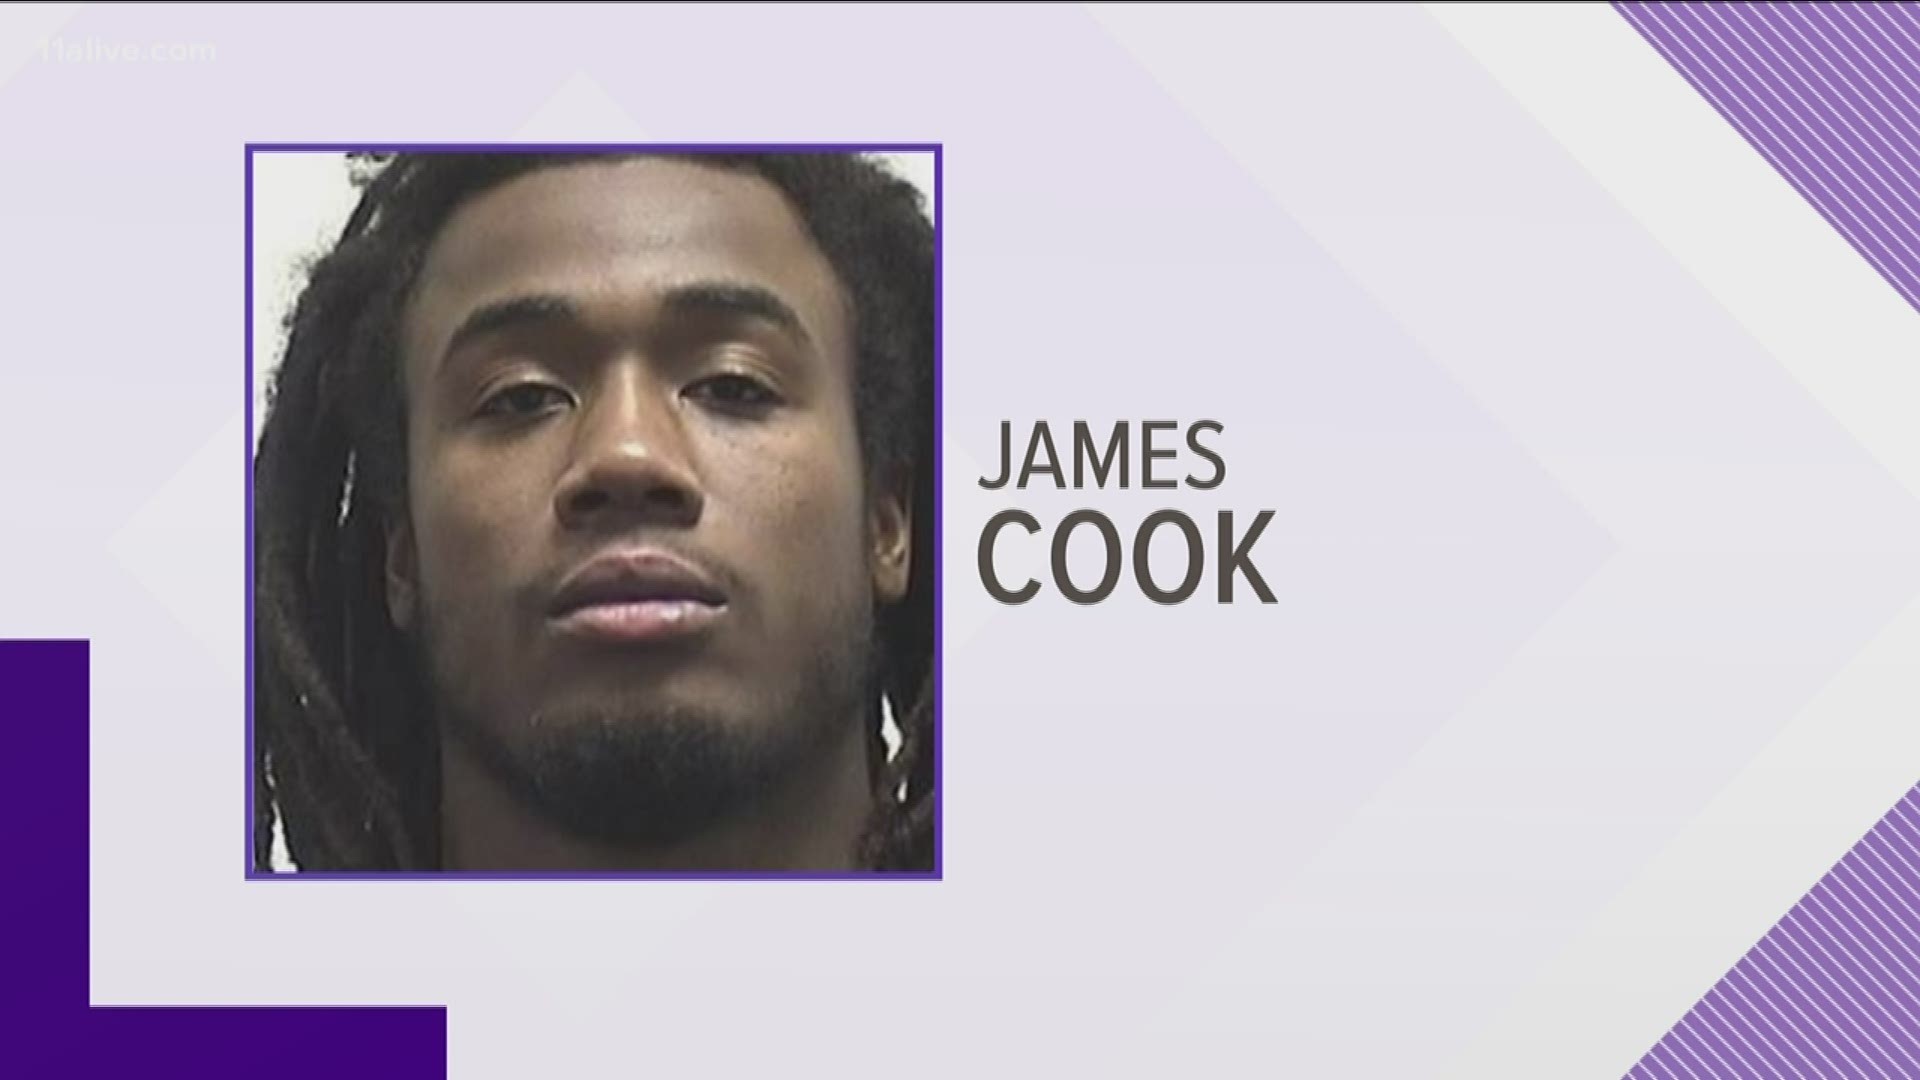 Georgia Bulldogs sophomore running back James Cook was arrested late Friday evening on two misdemeanor charges.